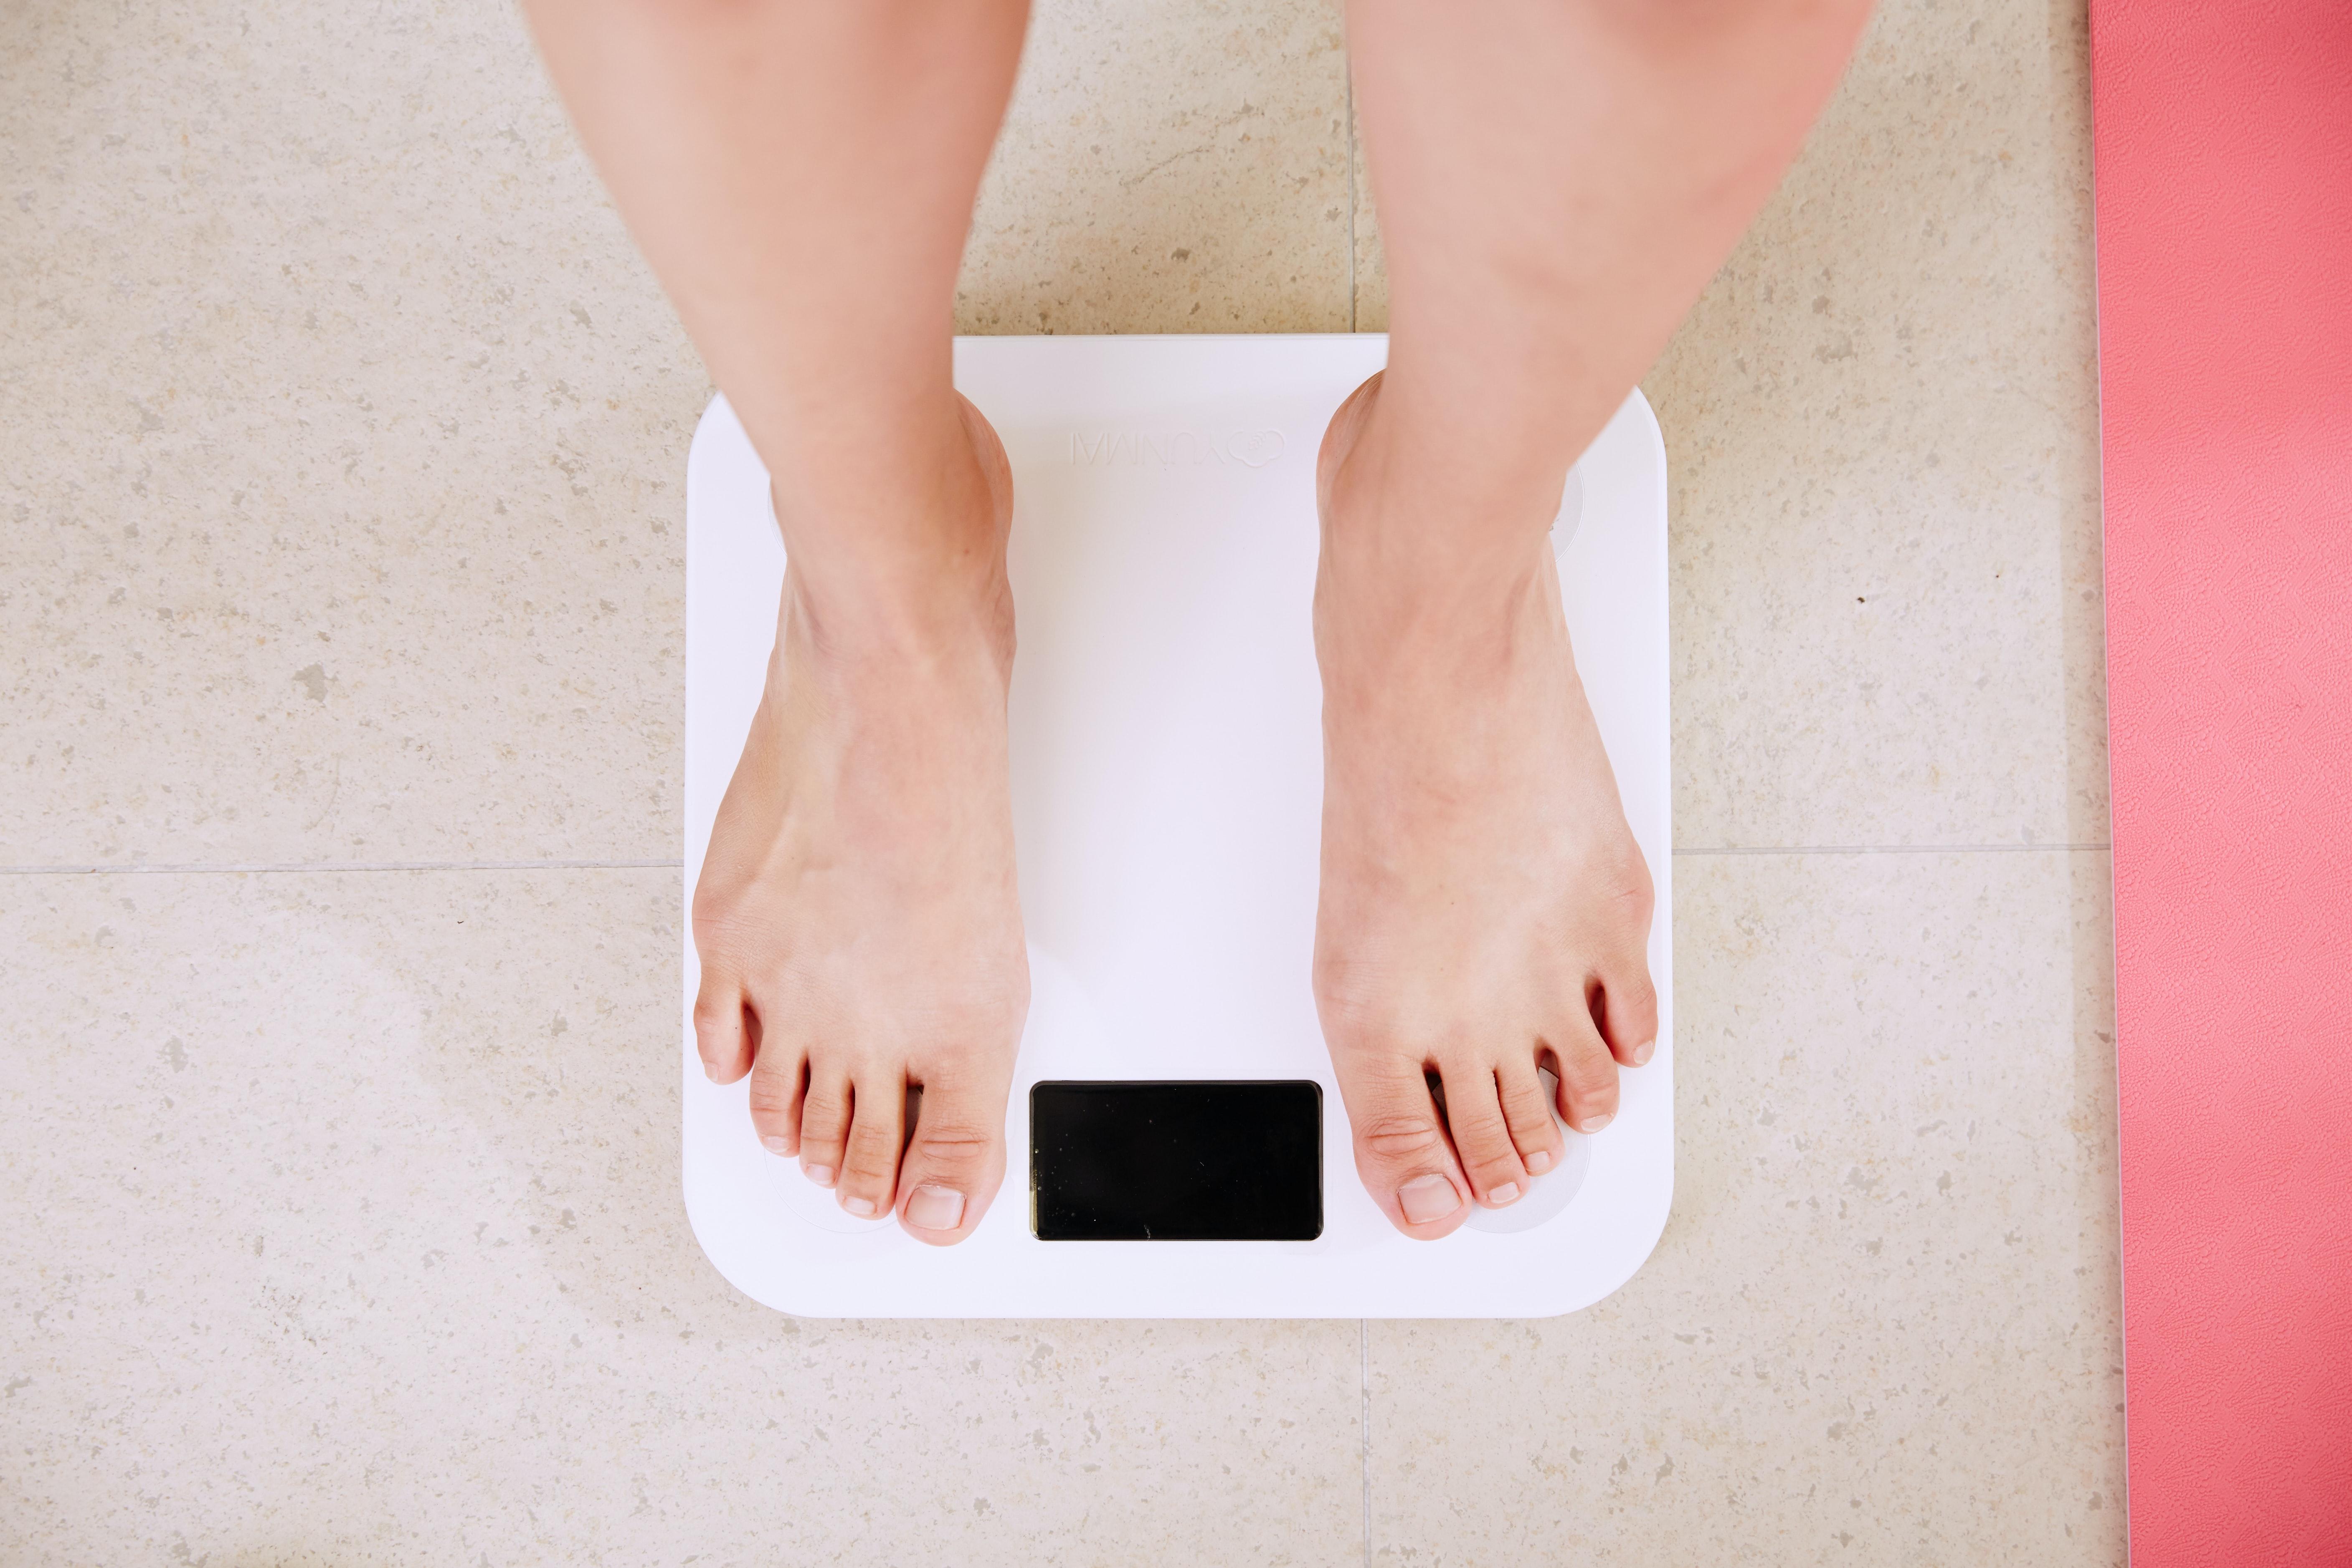 Obesogens: Chemicals that cause weight gain